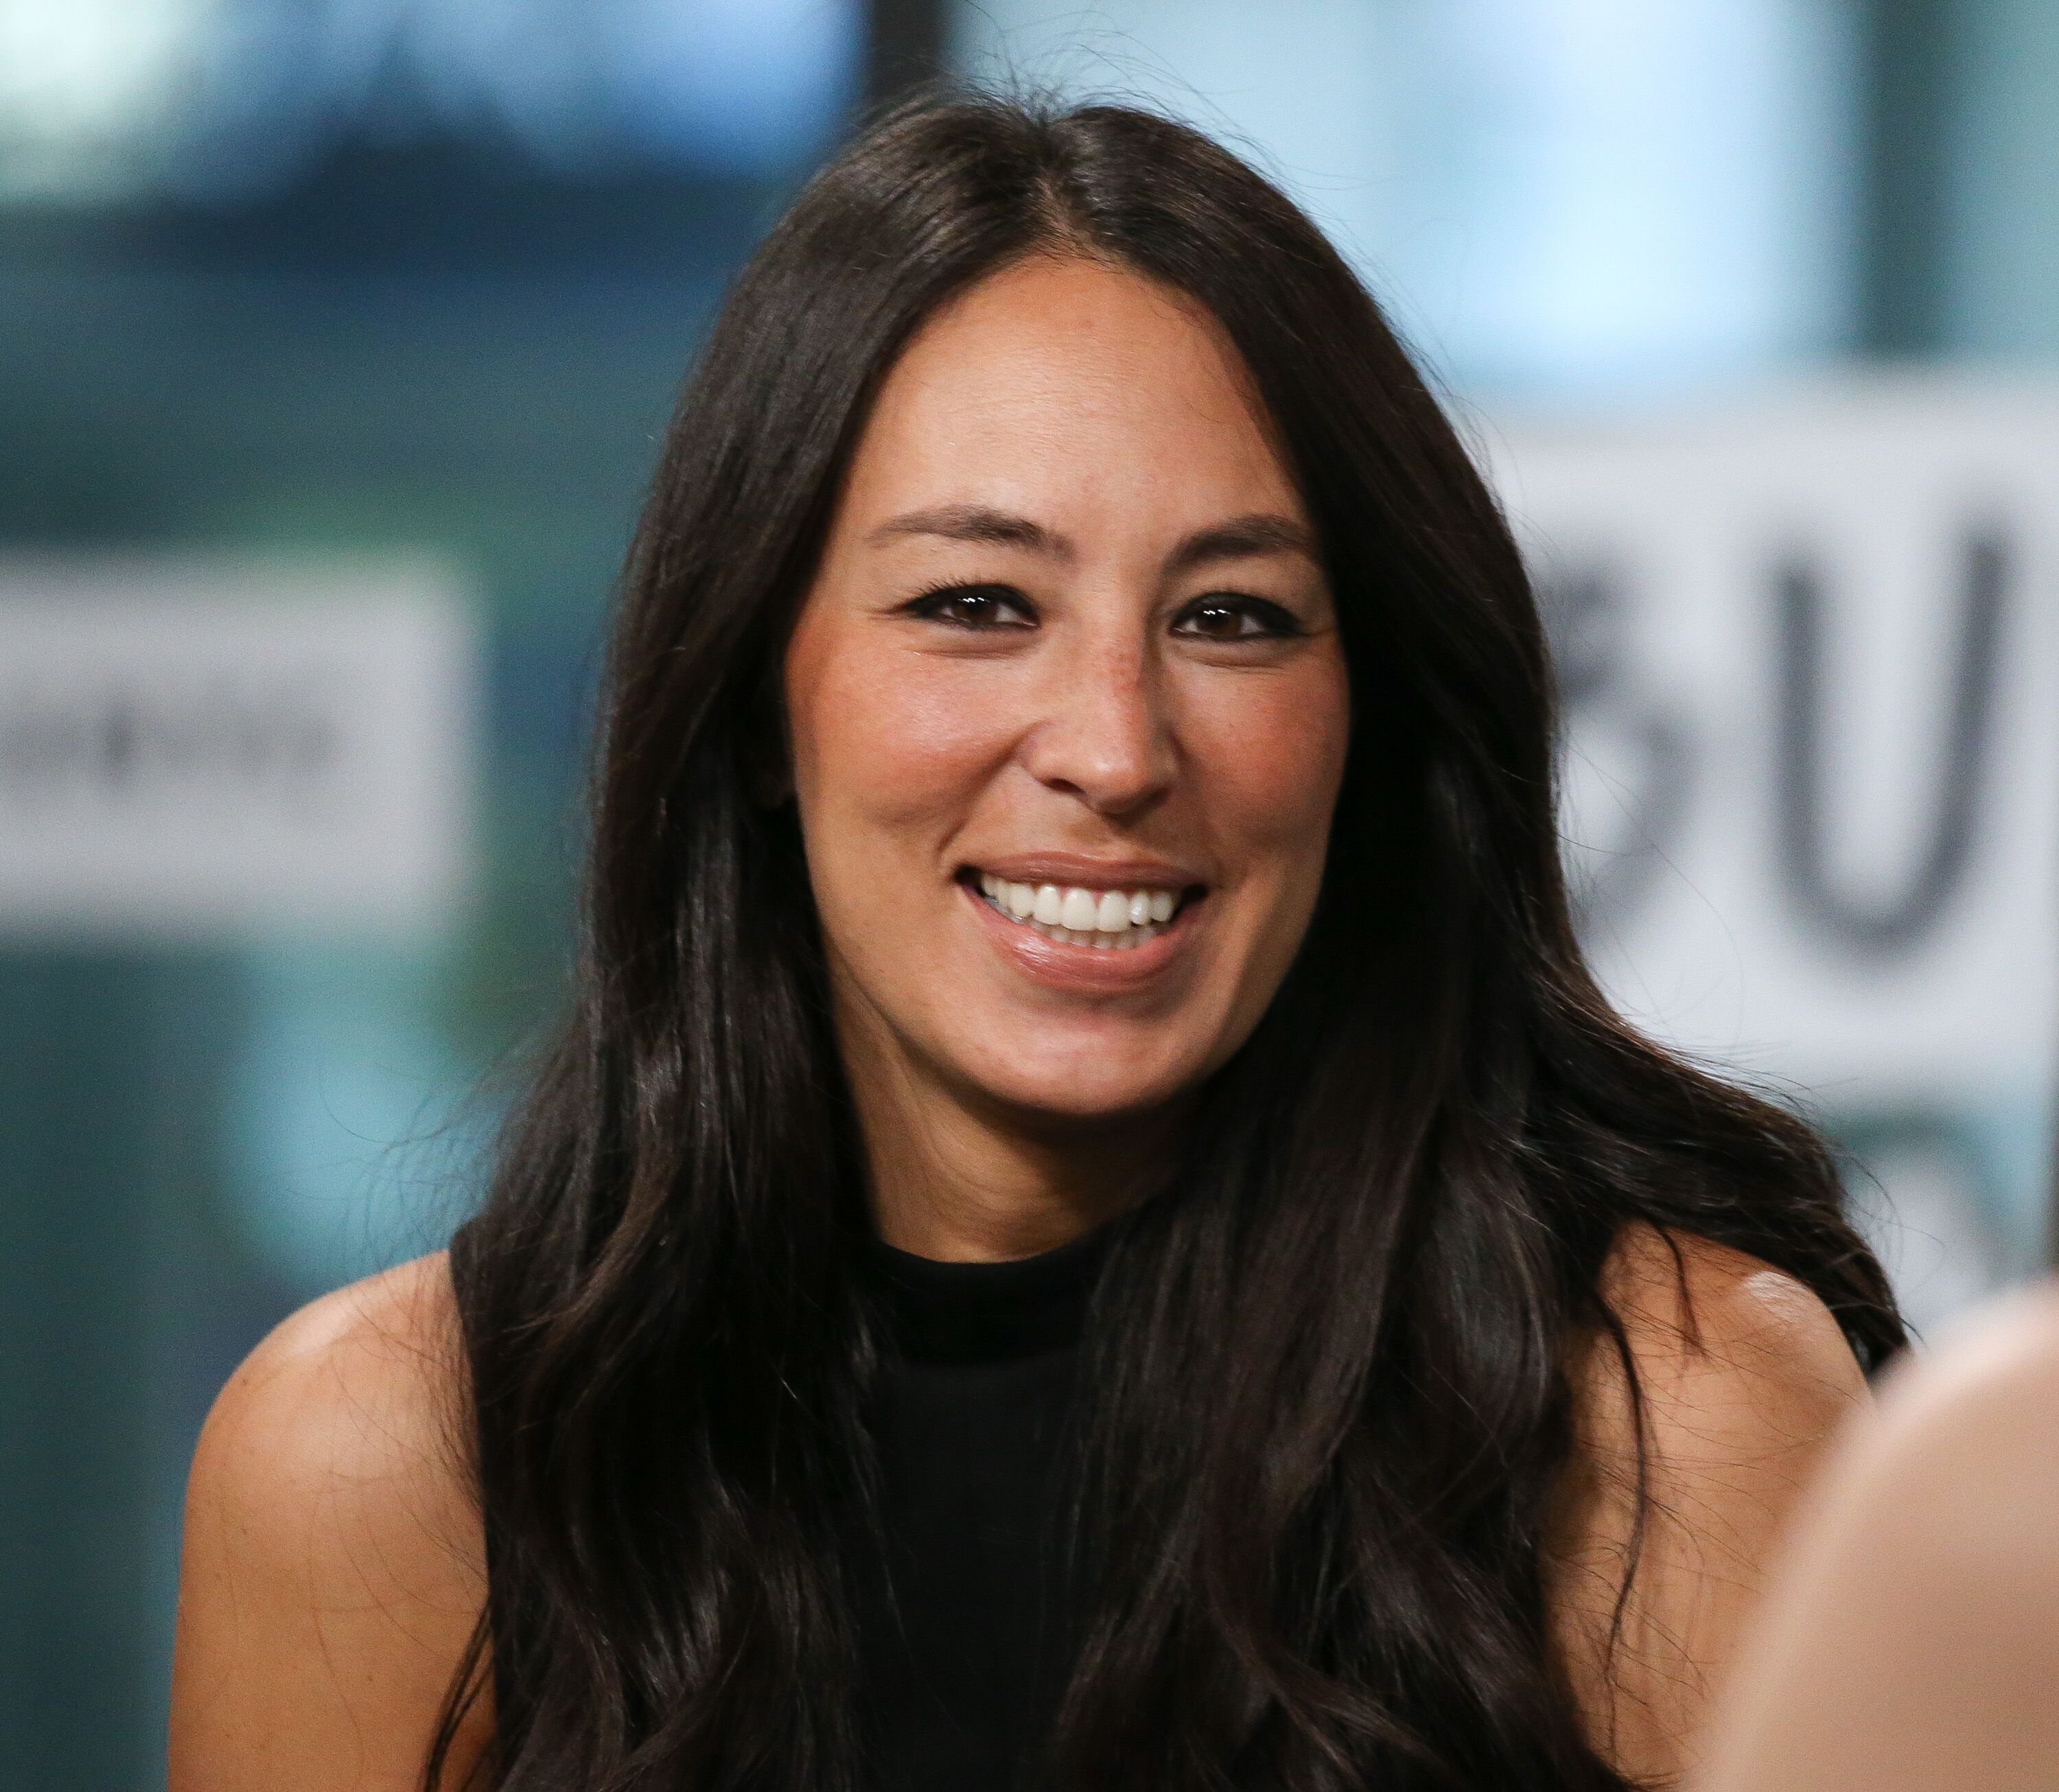 Joanna Gaines at Build Studio on October 18, 2017 in New York City. | Photo: Getty Images